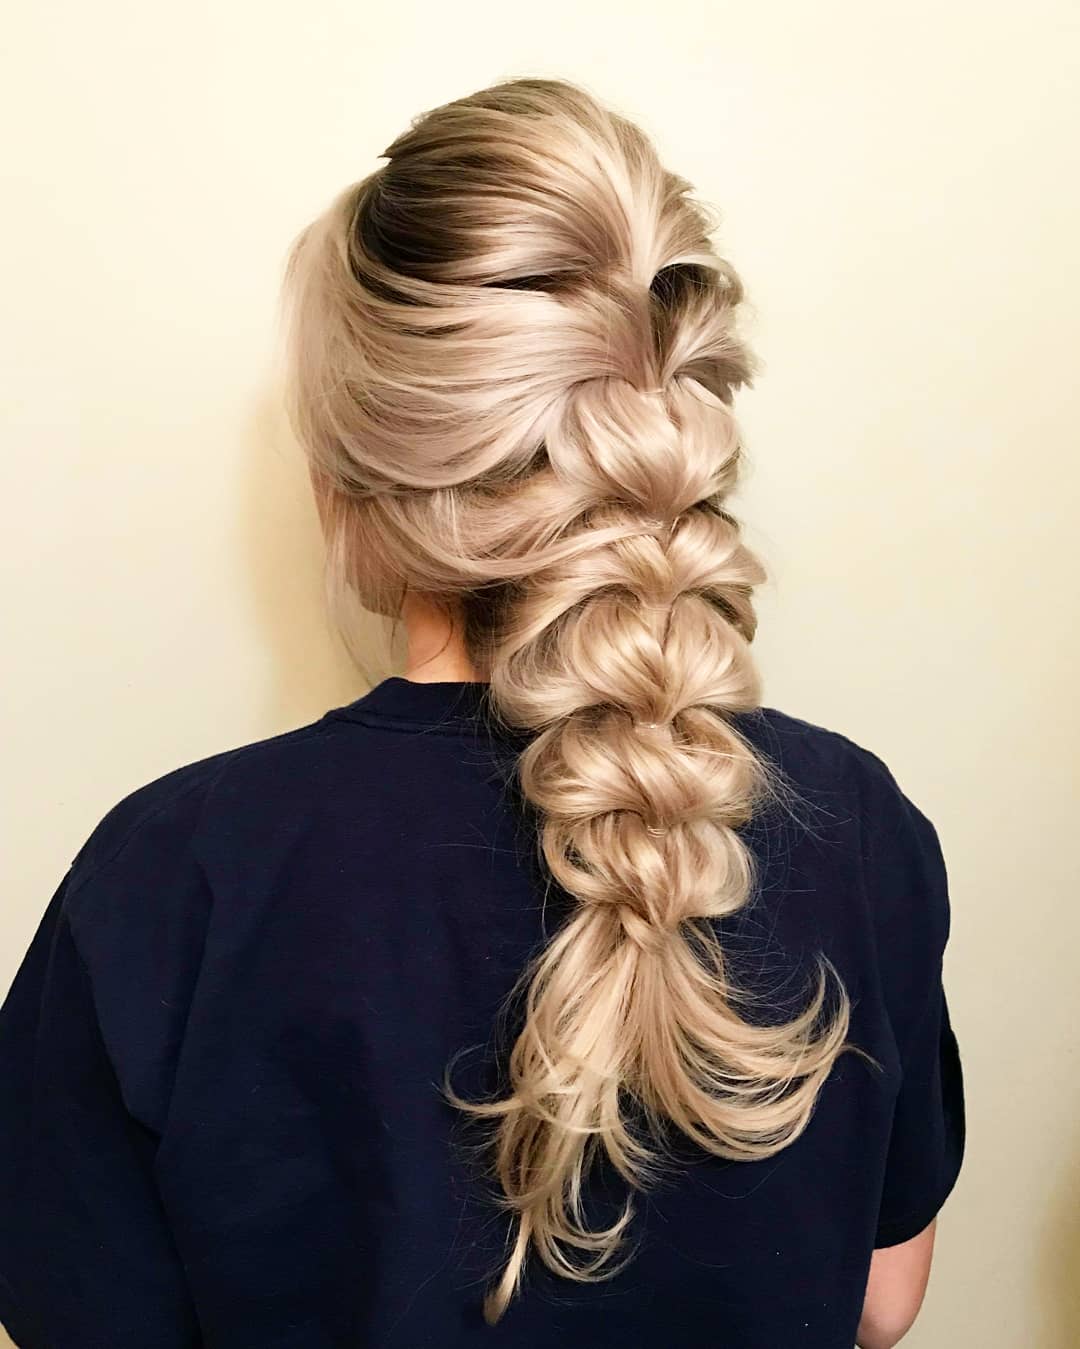 Get Inspired by These Long Braided Hairstyles